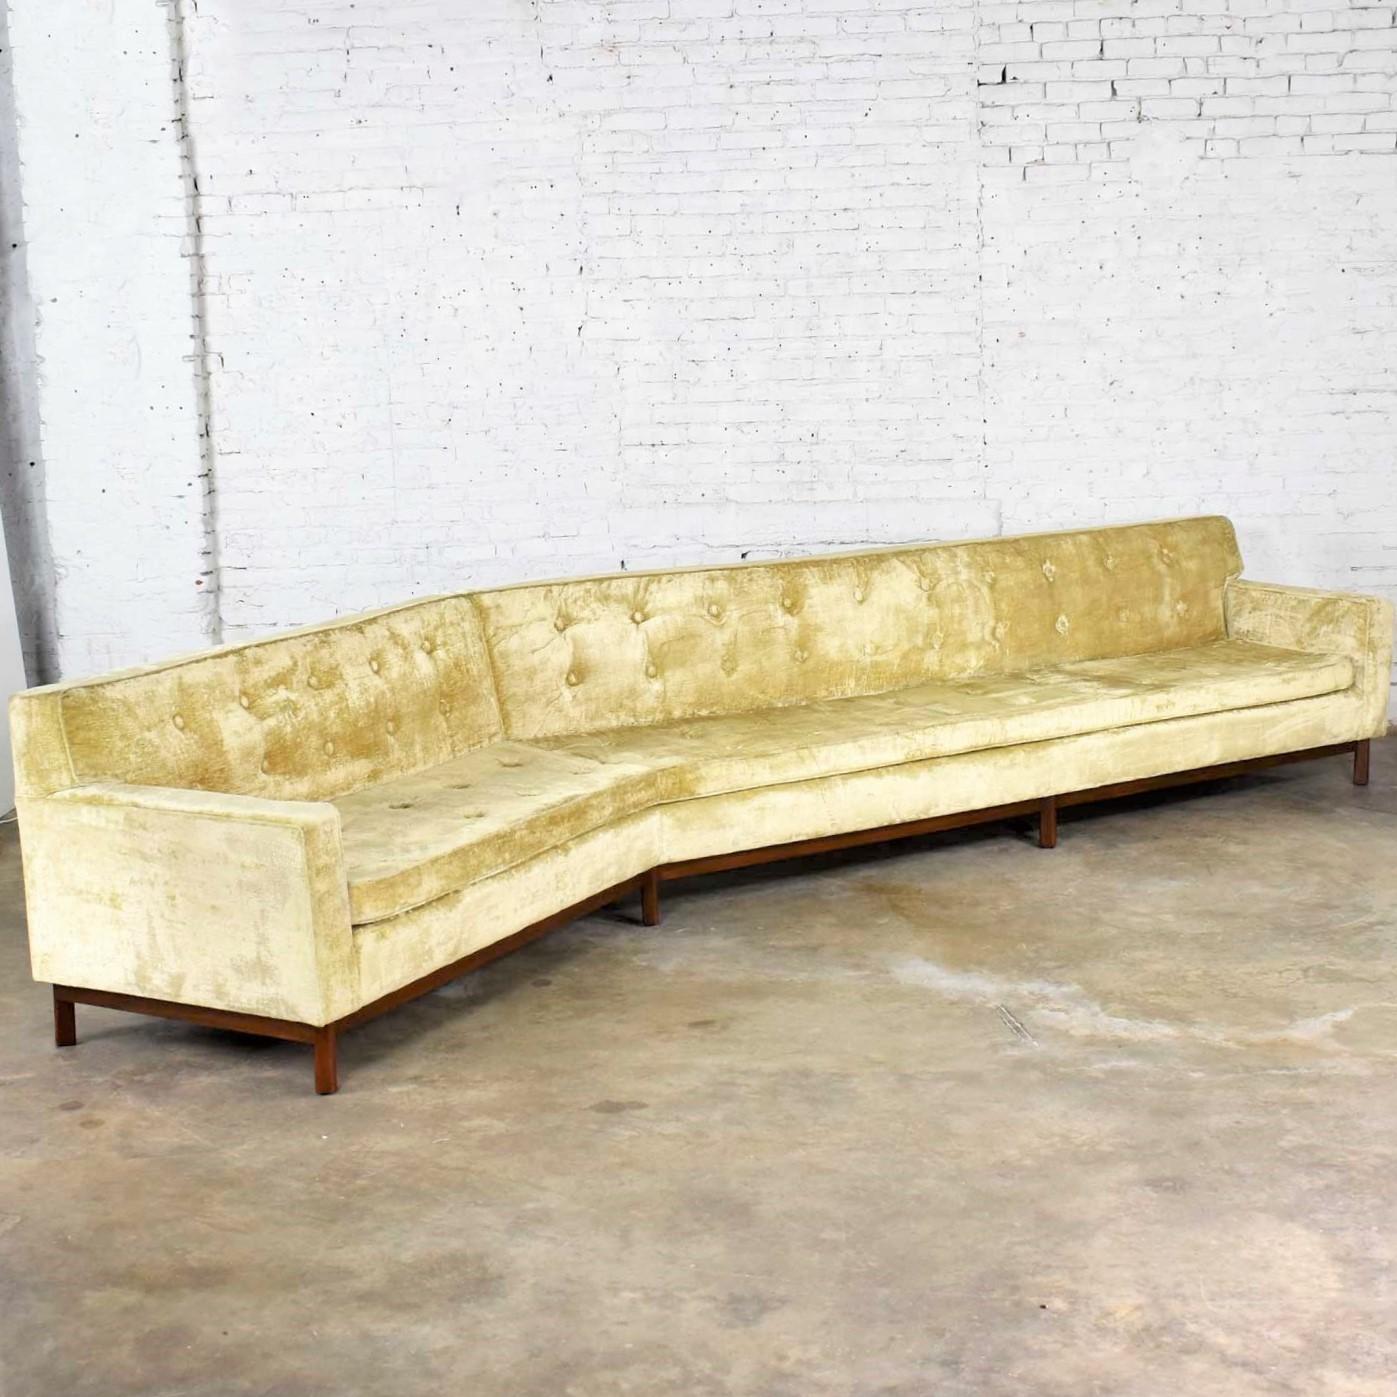 Wonderful and monumental 14-foot-wide angled Mid-Century Modern green velvet sofa in the style of Edward Wormley for Dunbar. It is in good vintage condition. It has been professionally cleaned and the fabric is presentable. No holes or worn spots